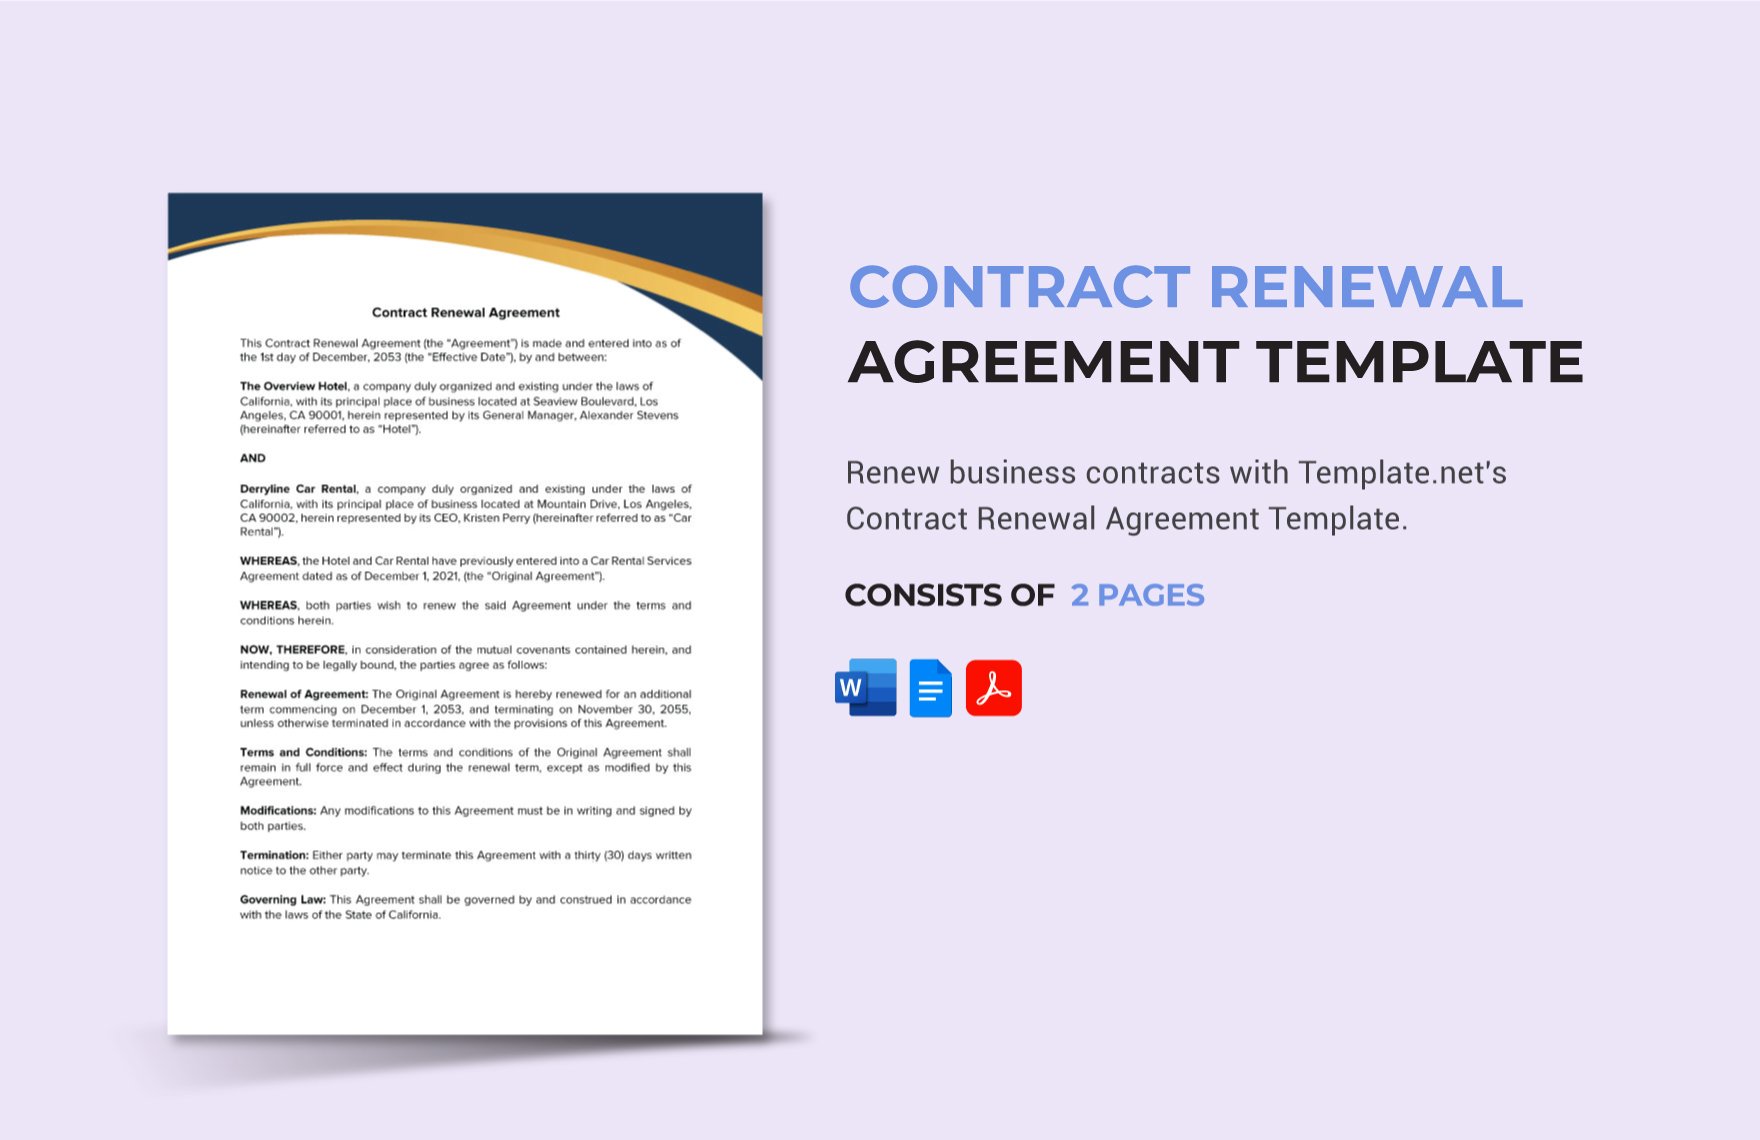 Free Contract Renewal Agreement Template in Word, Google Docs, PDF